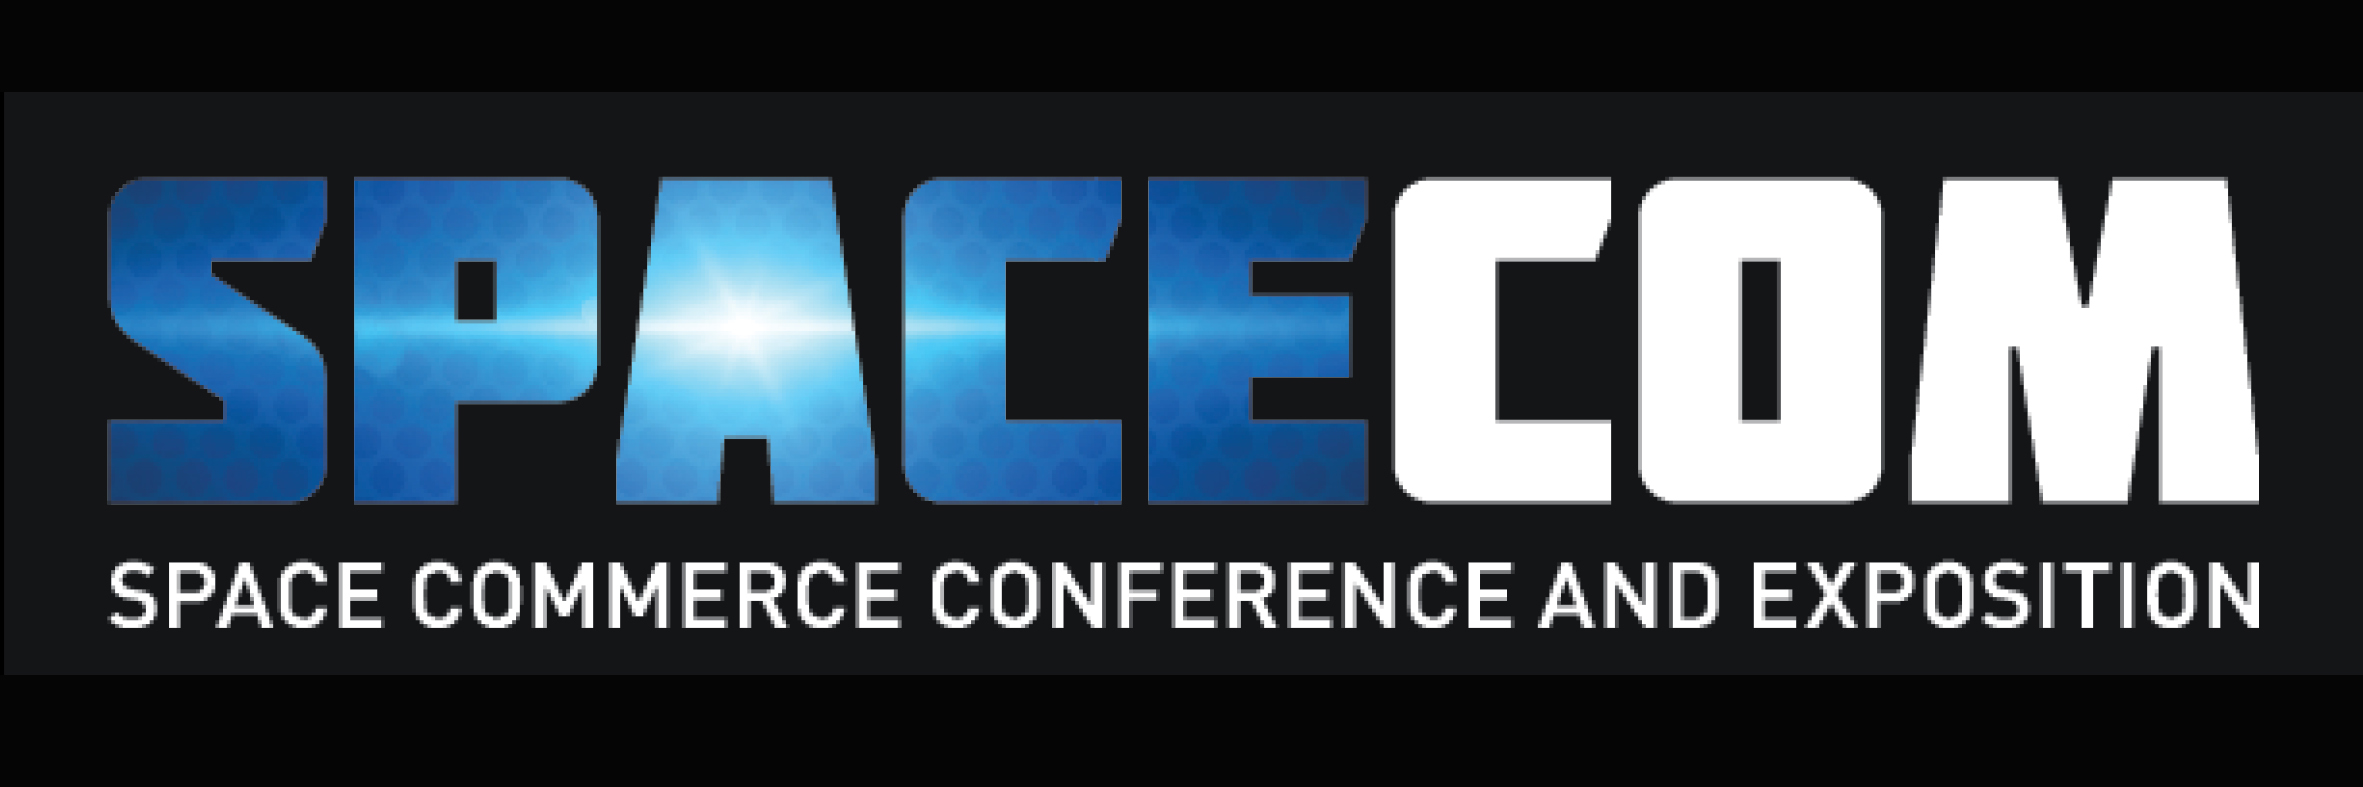 Space Commerce Conference and Exposition (SpaceCom)